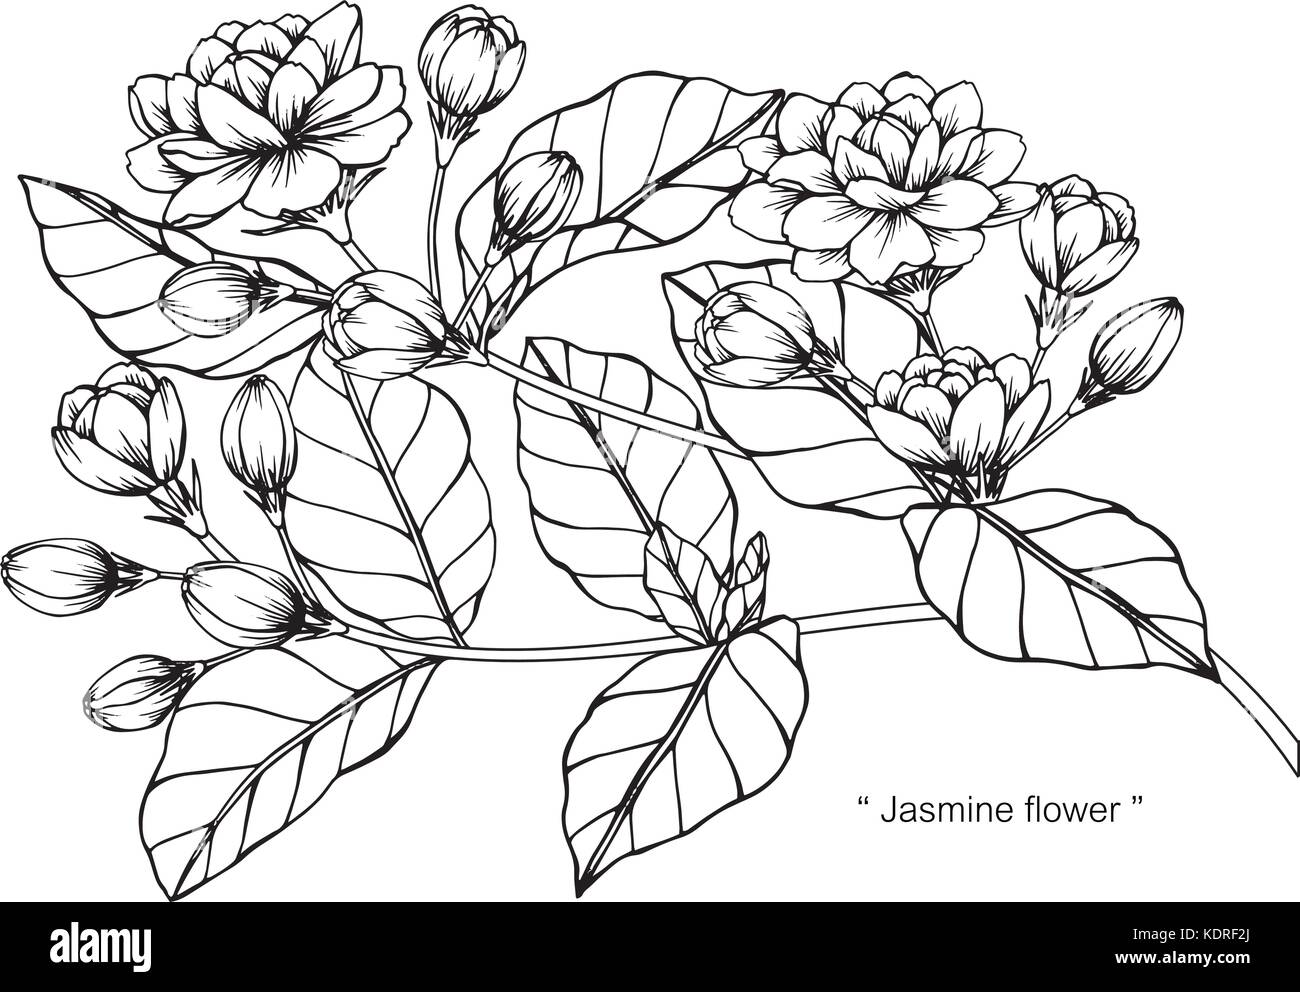 Jasmine flower drawing  illustration. Black and white with line art. Stock Vector